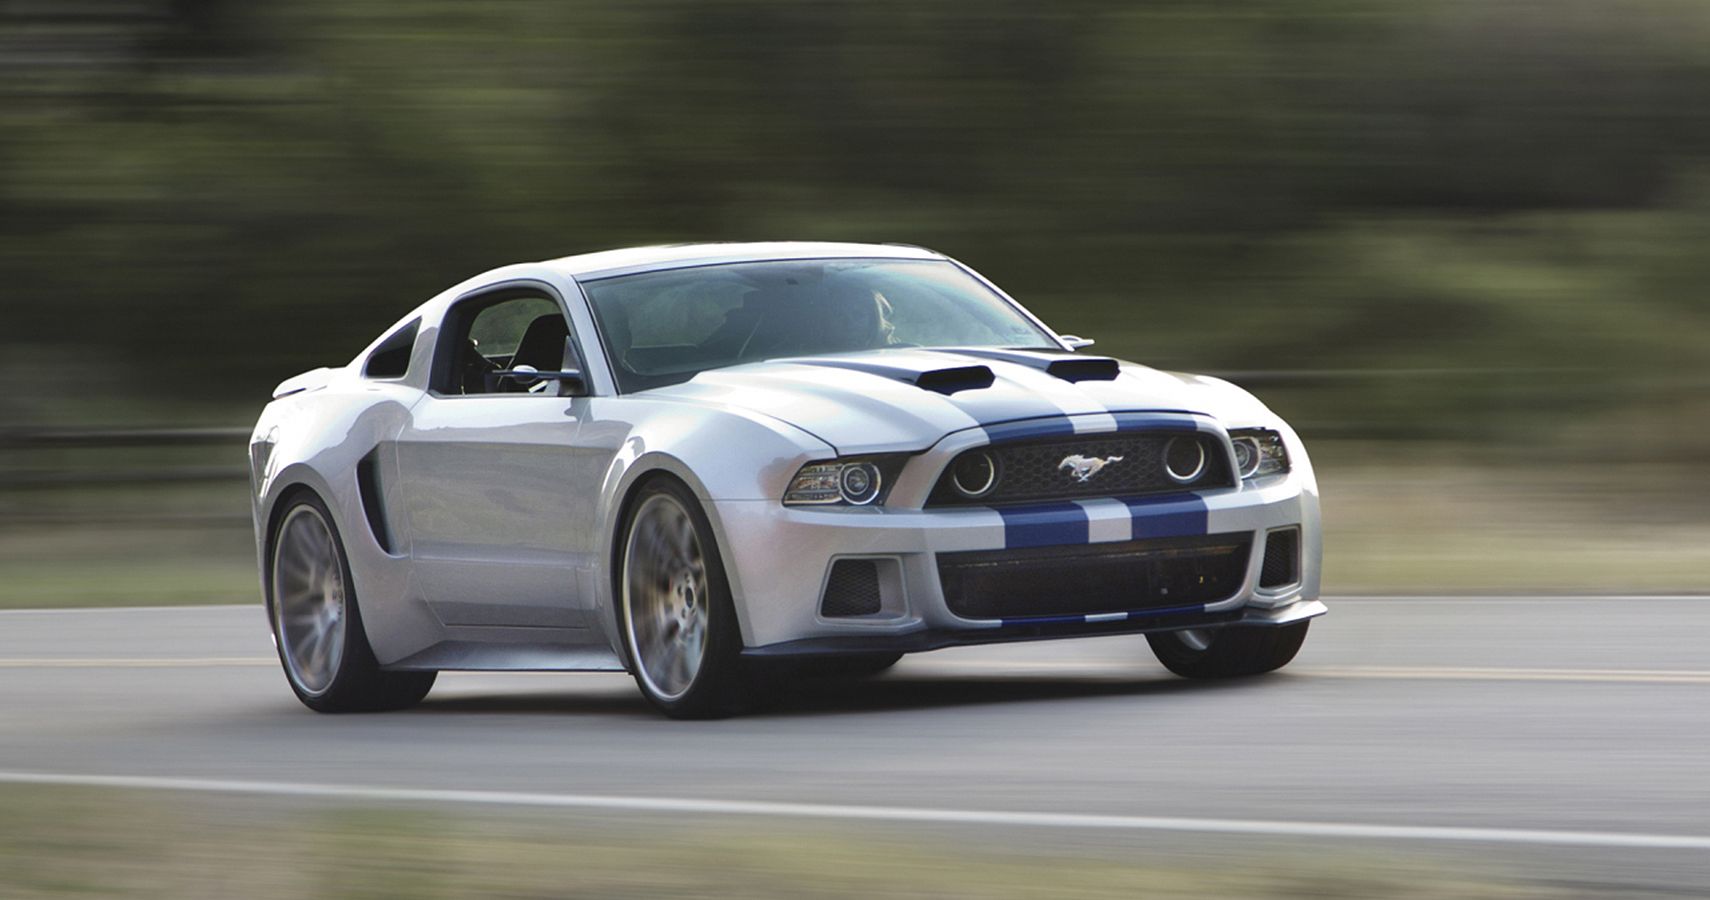 Here's What Happened To The Mustang From Need For Speed